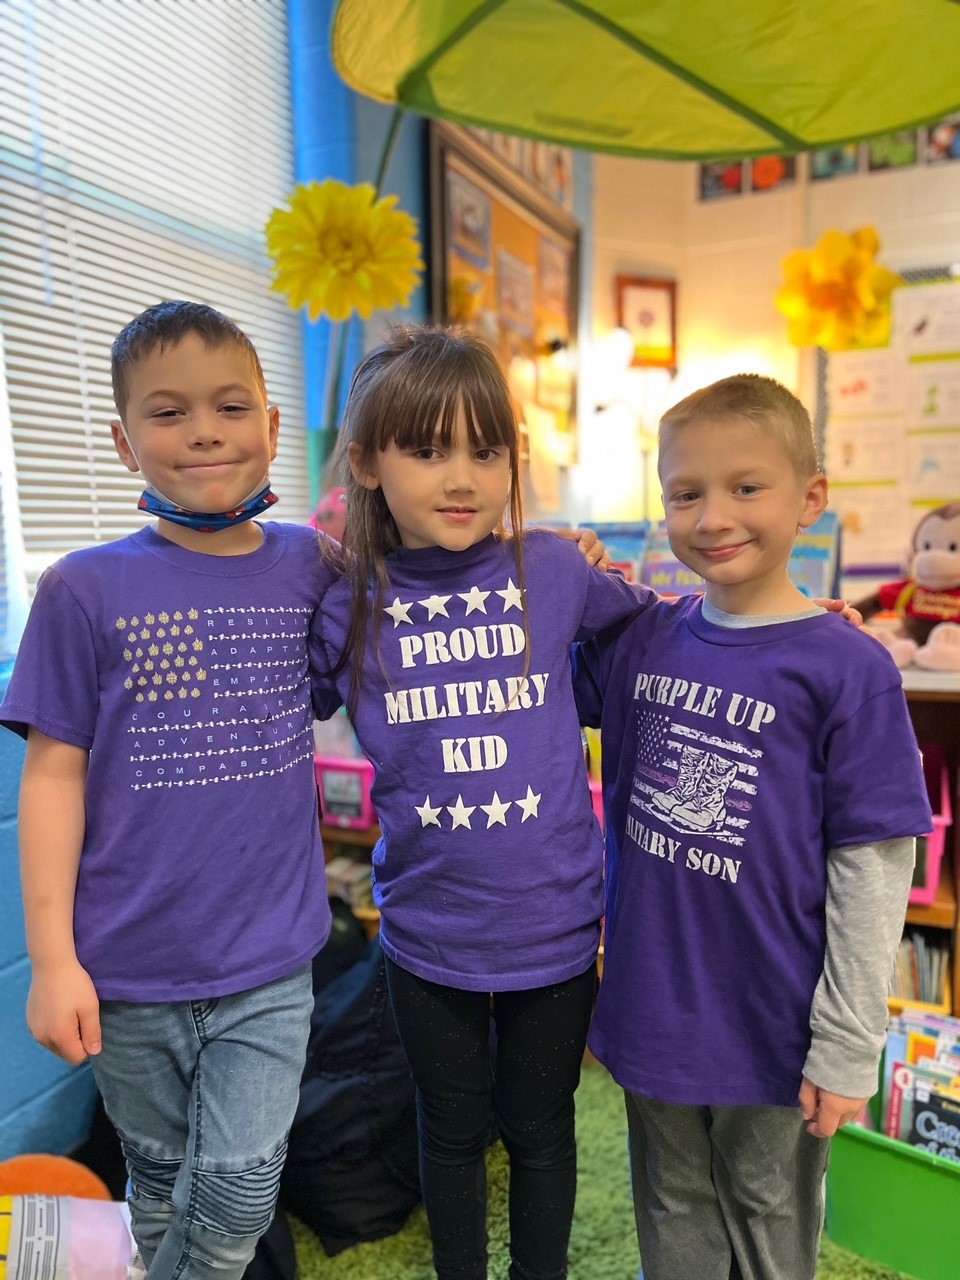 Students dressed in purple